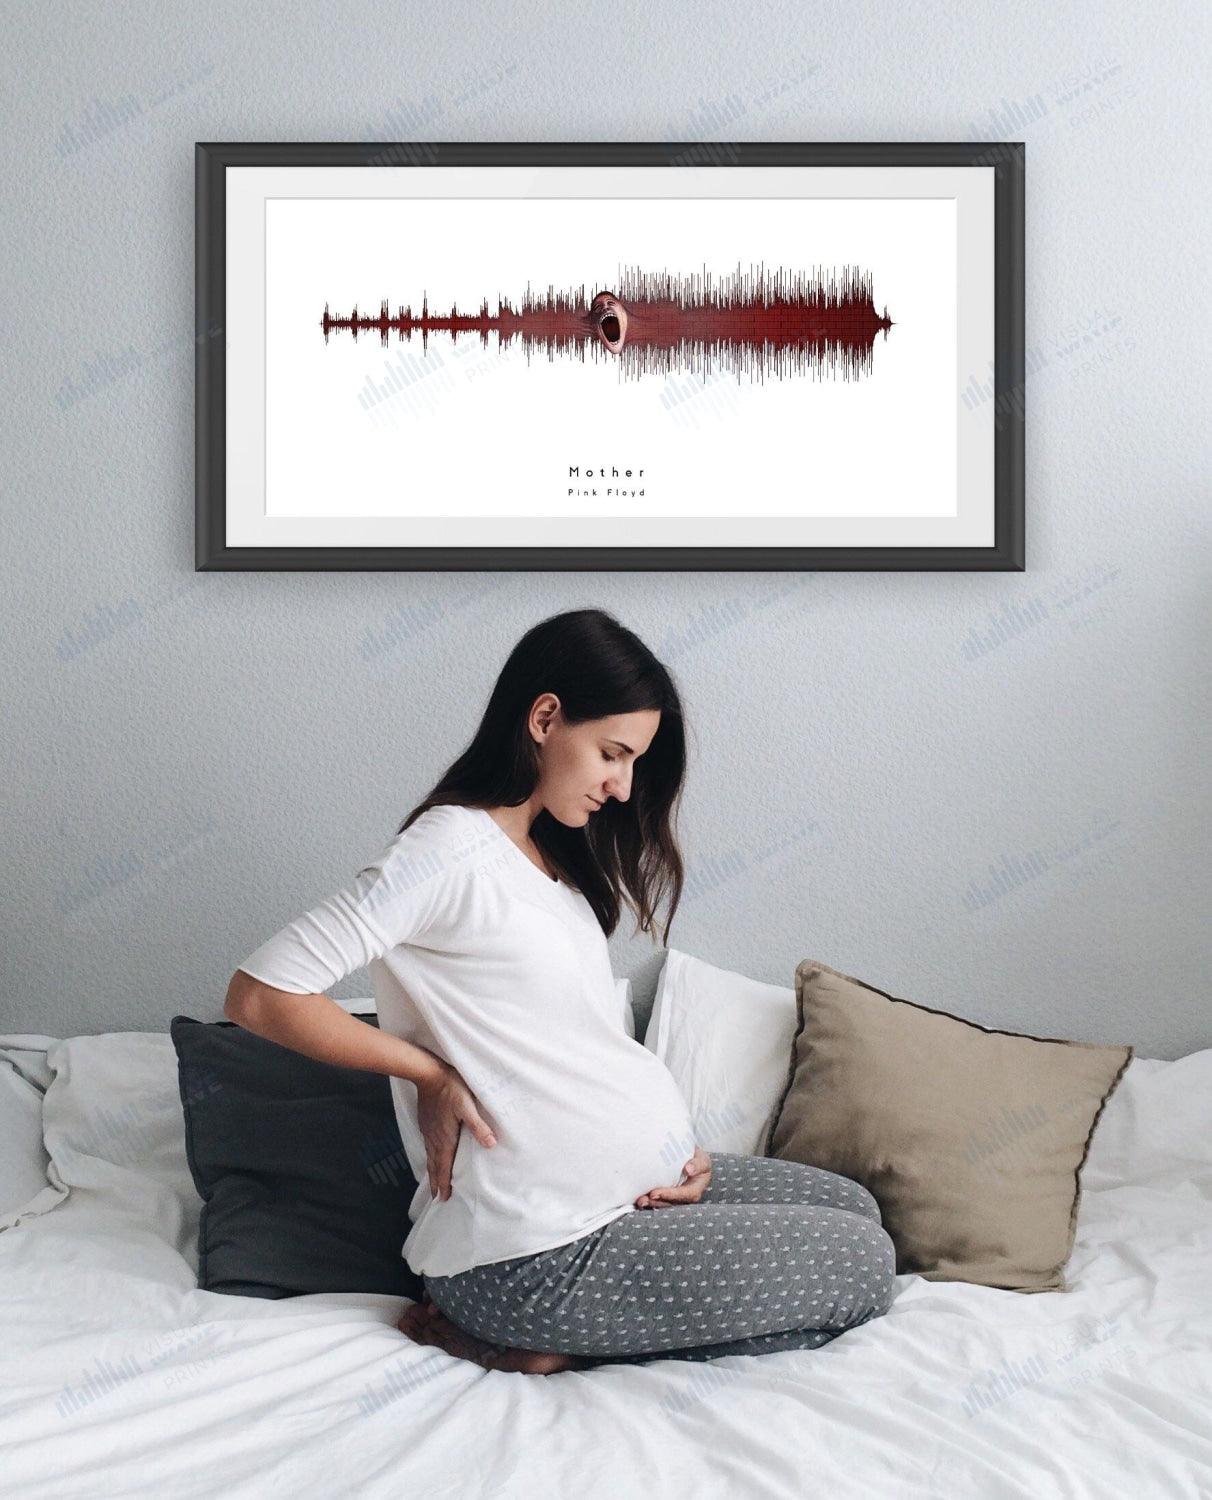 Mother by Pink Floyd - Visual Wave Prints